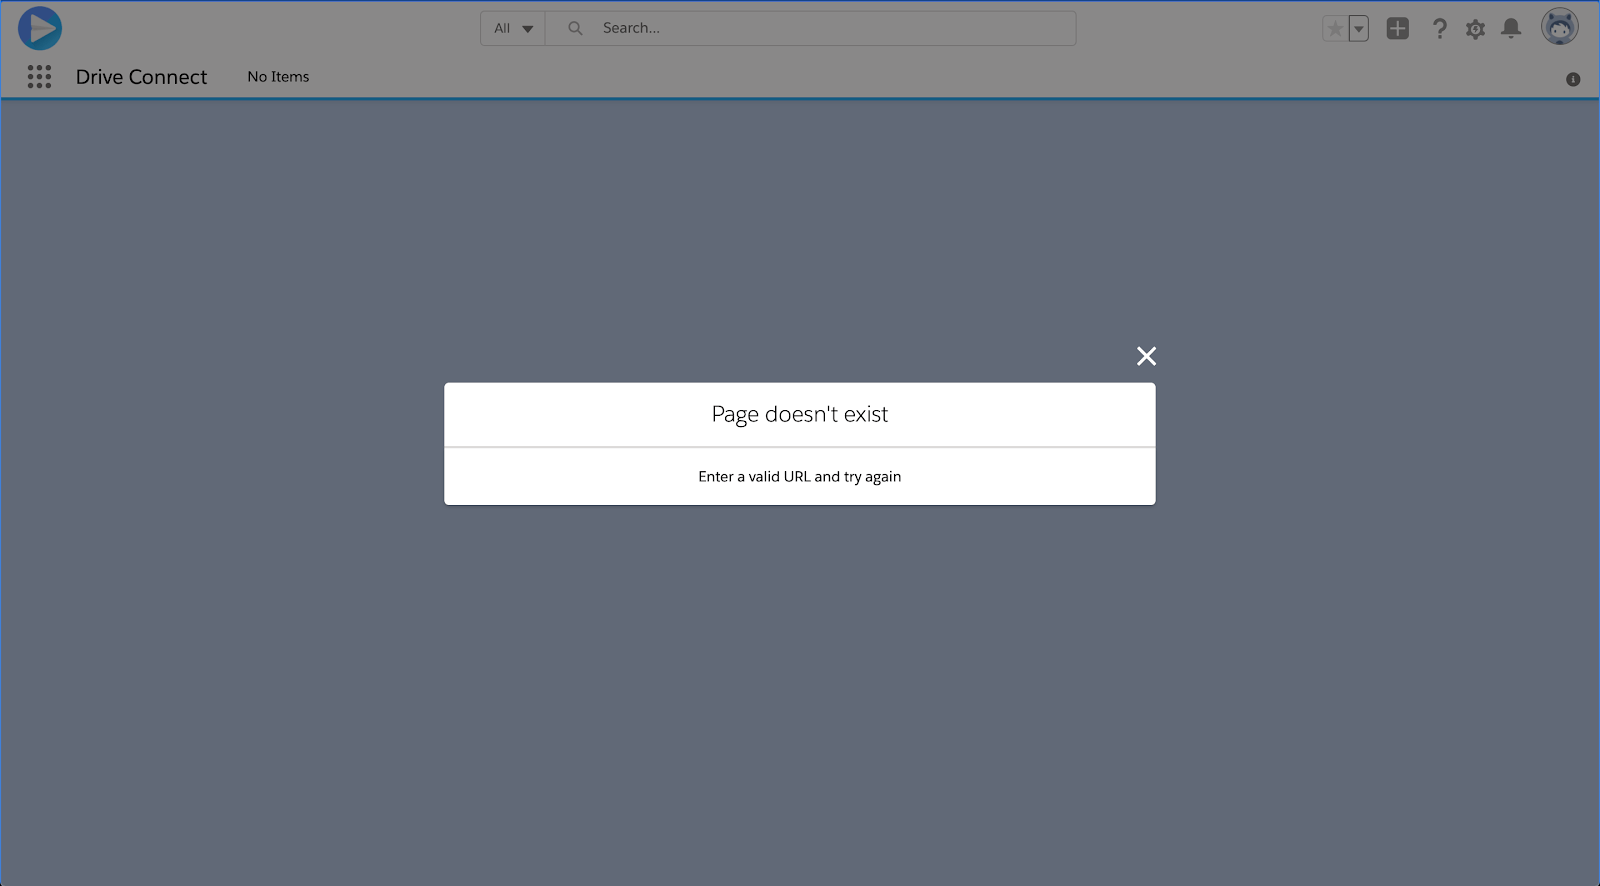 Page doesn't exist